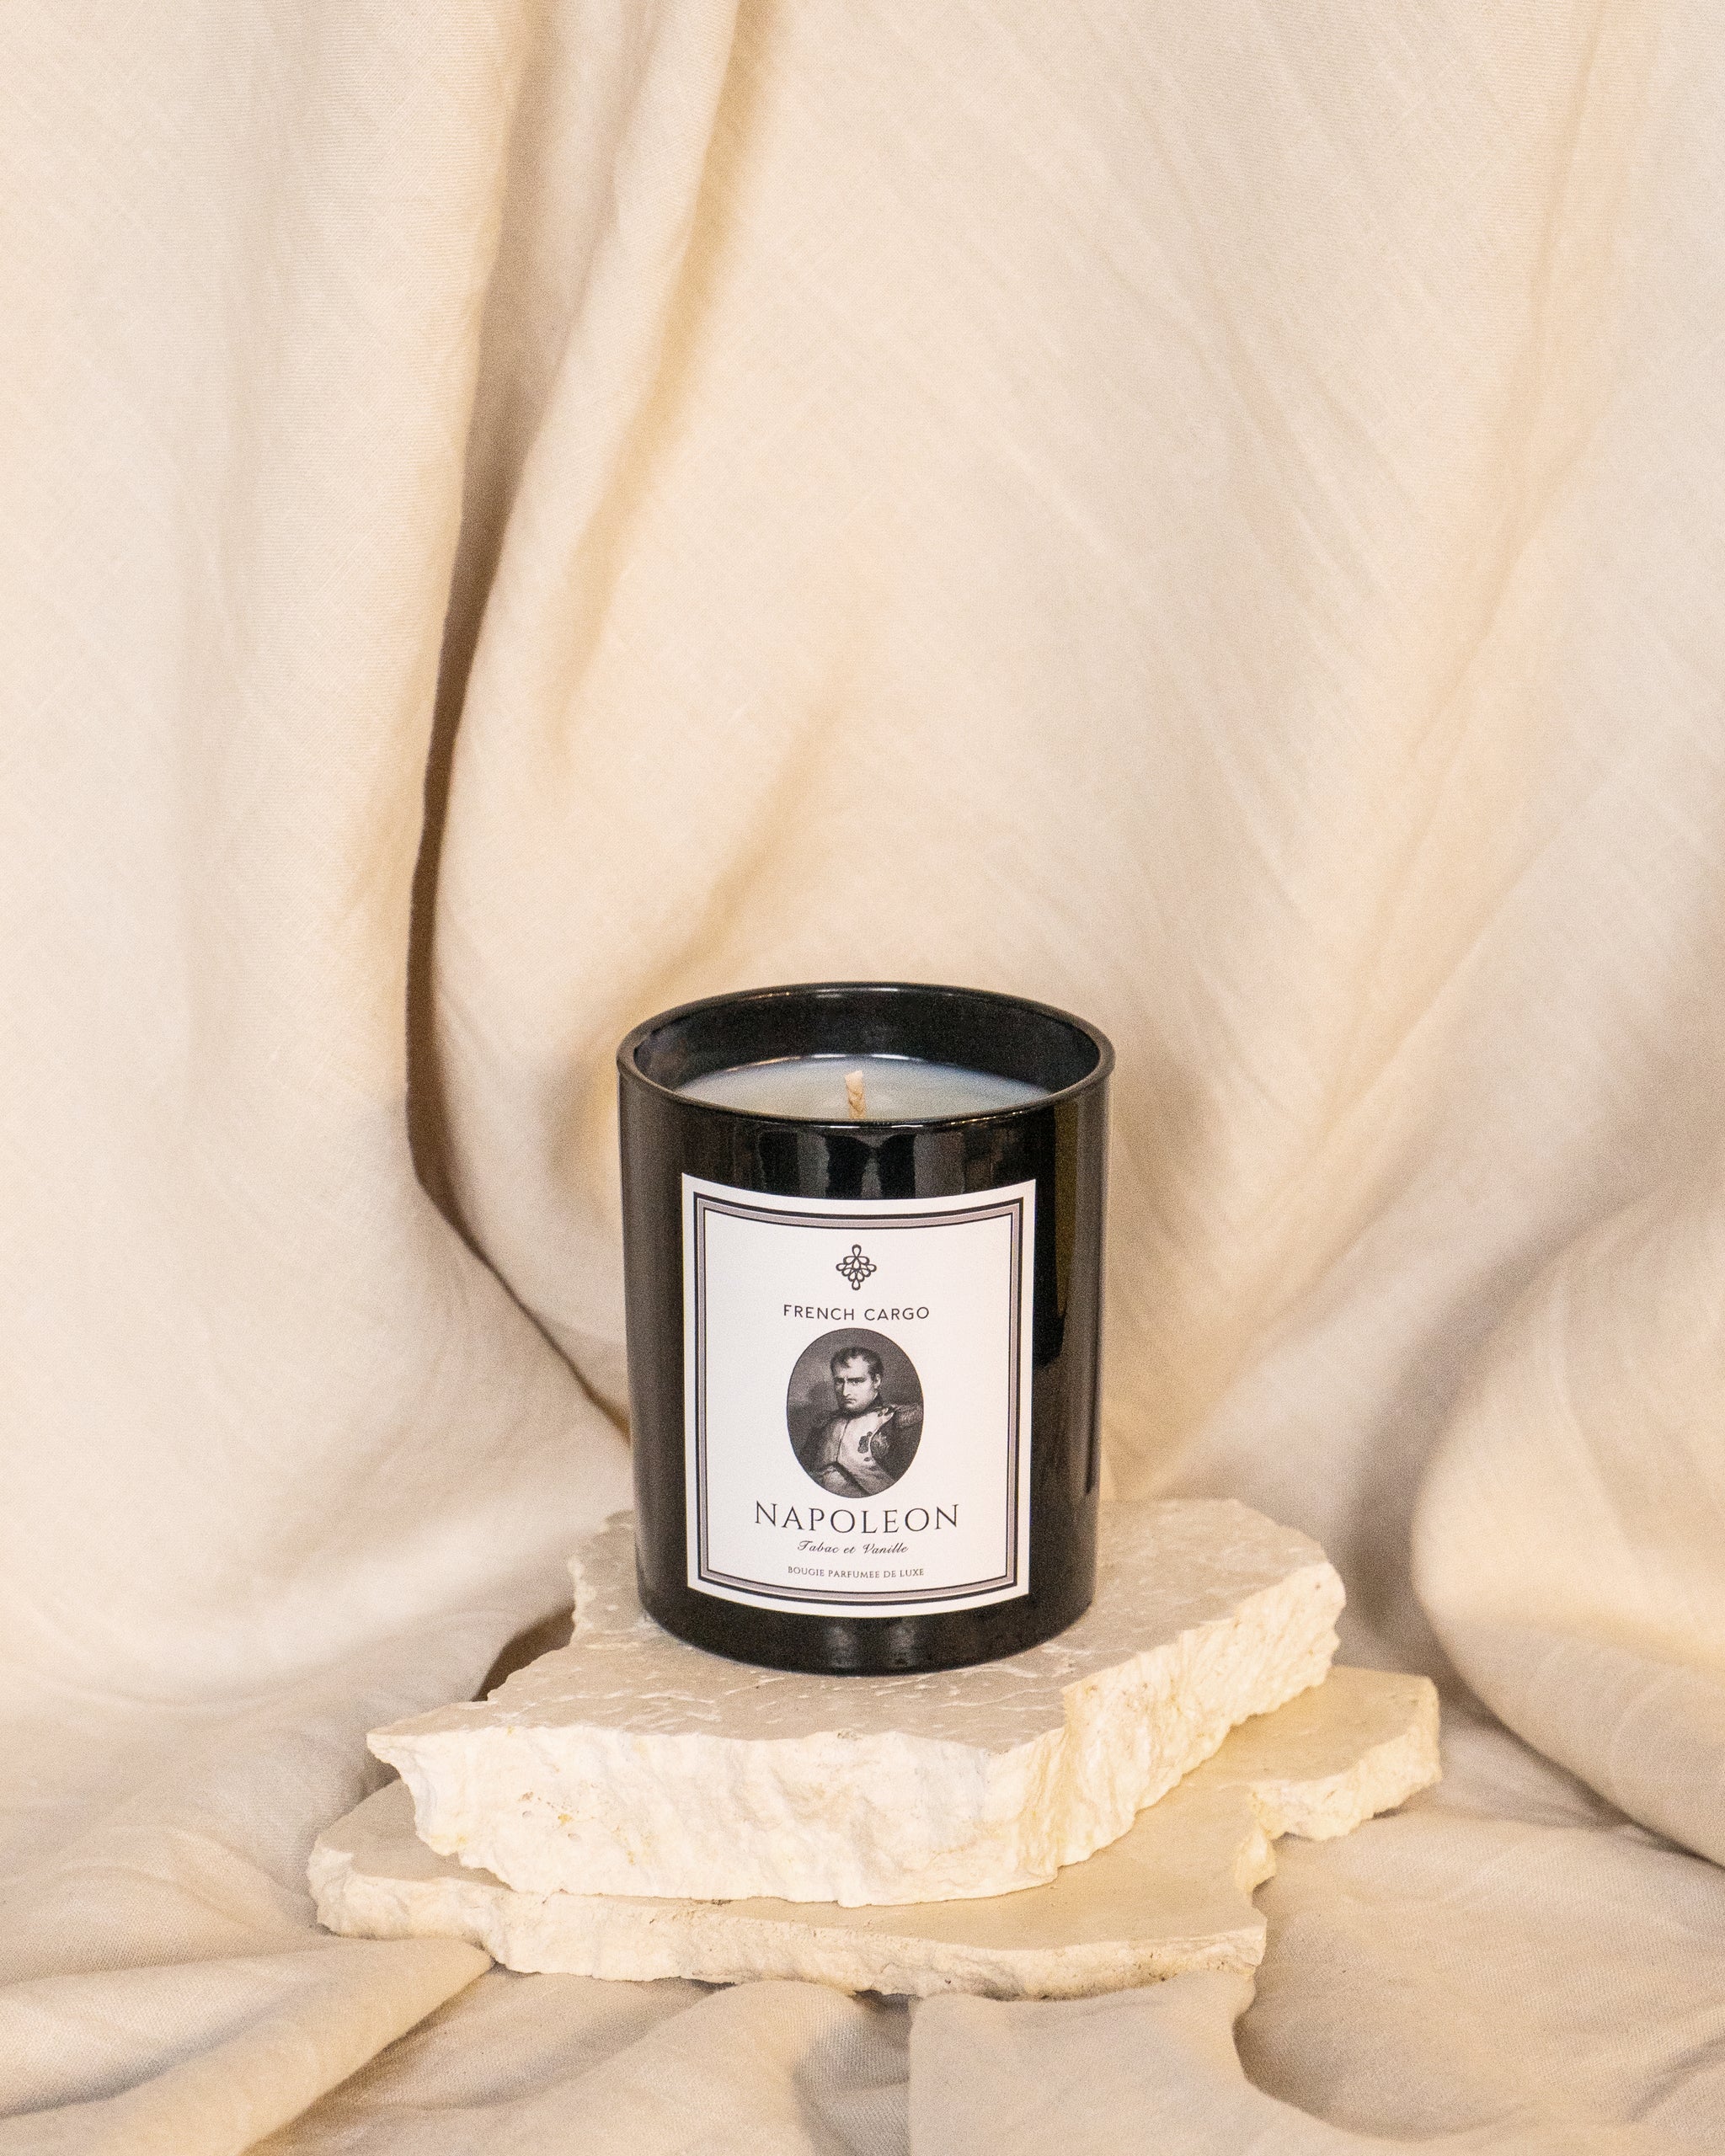 French Linen Luxury Candle